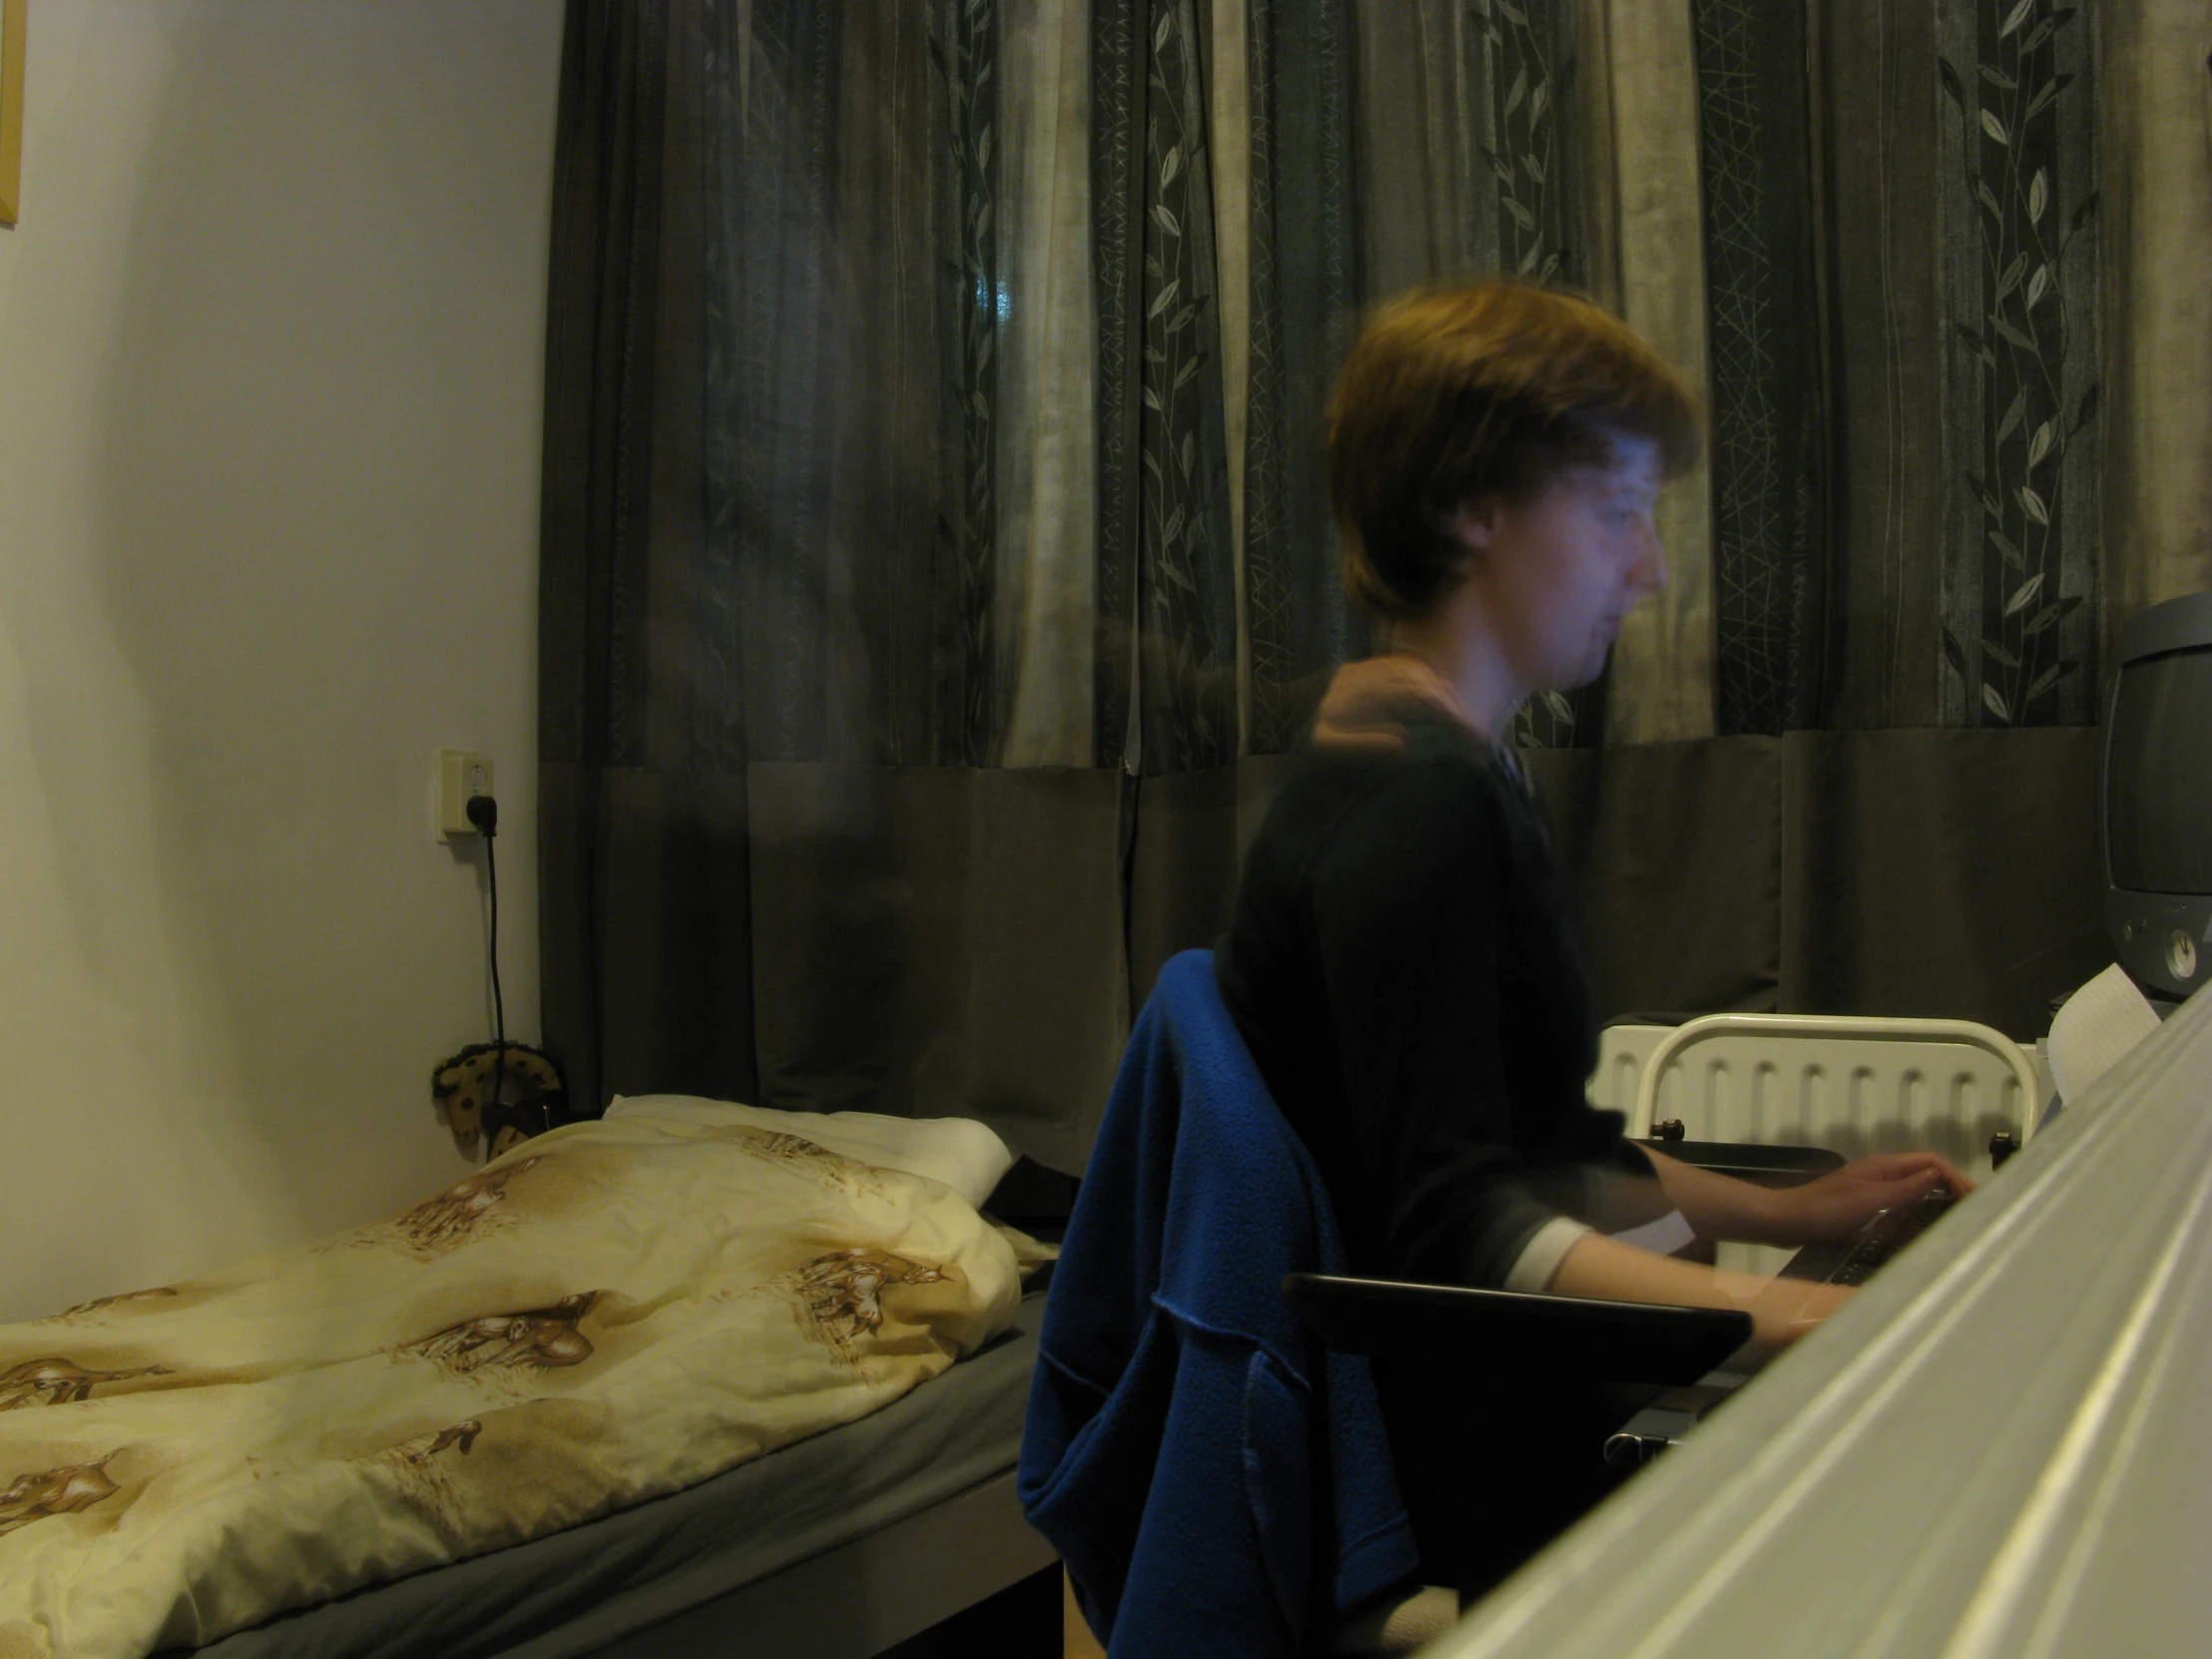 a boy using his laptop while in a bedroom